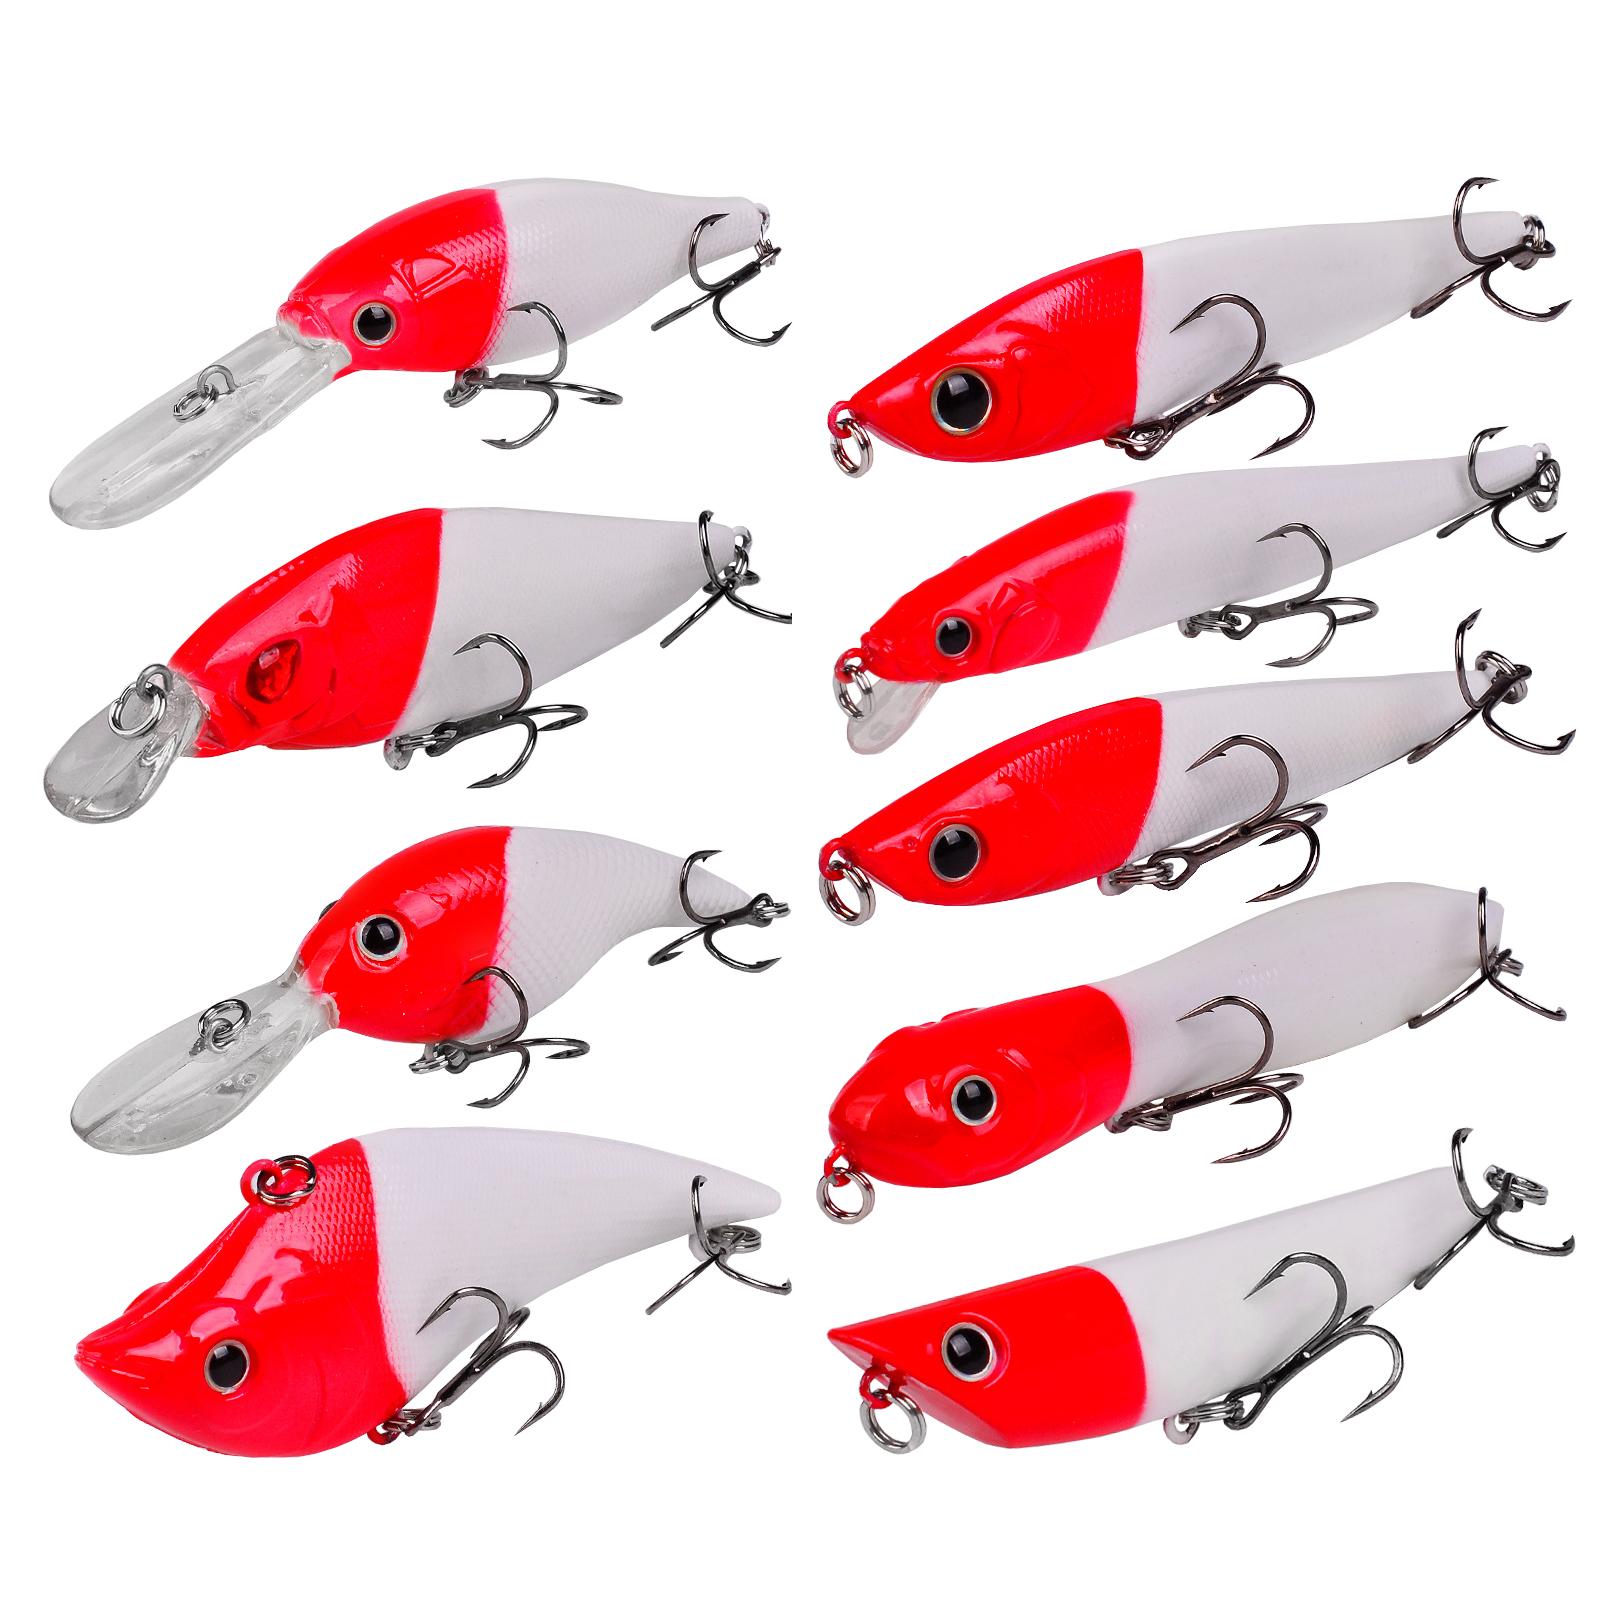 FREE FISHER 9pcs Bass Fishing Lures Kit Red Head Mixed Hard Baits Minnow Crankbait Pencil VIB Bass Pike Swimbait for Saltwater/Freshwater 